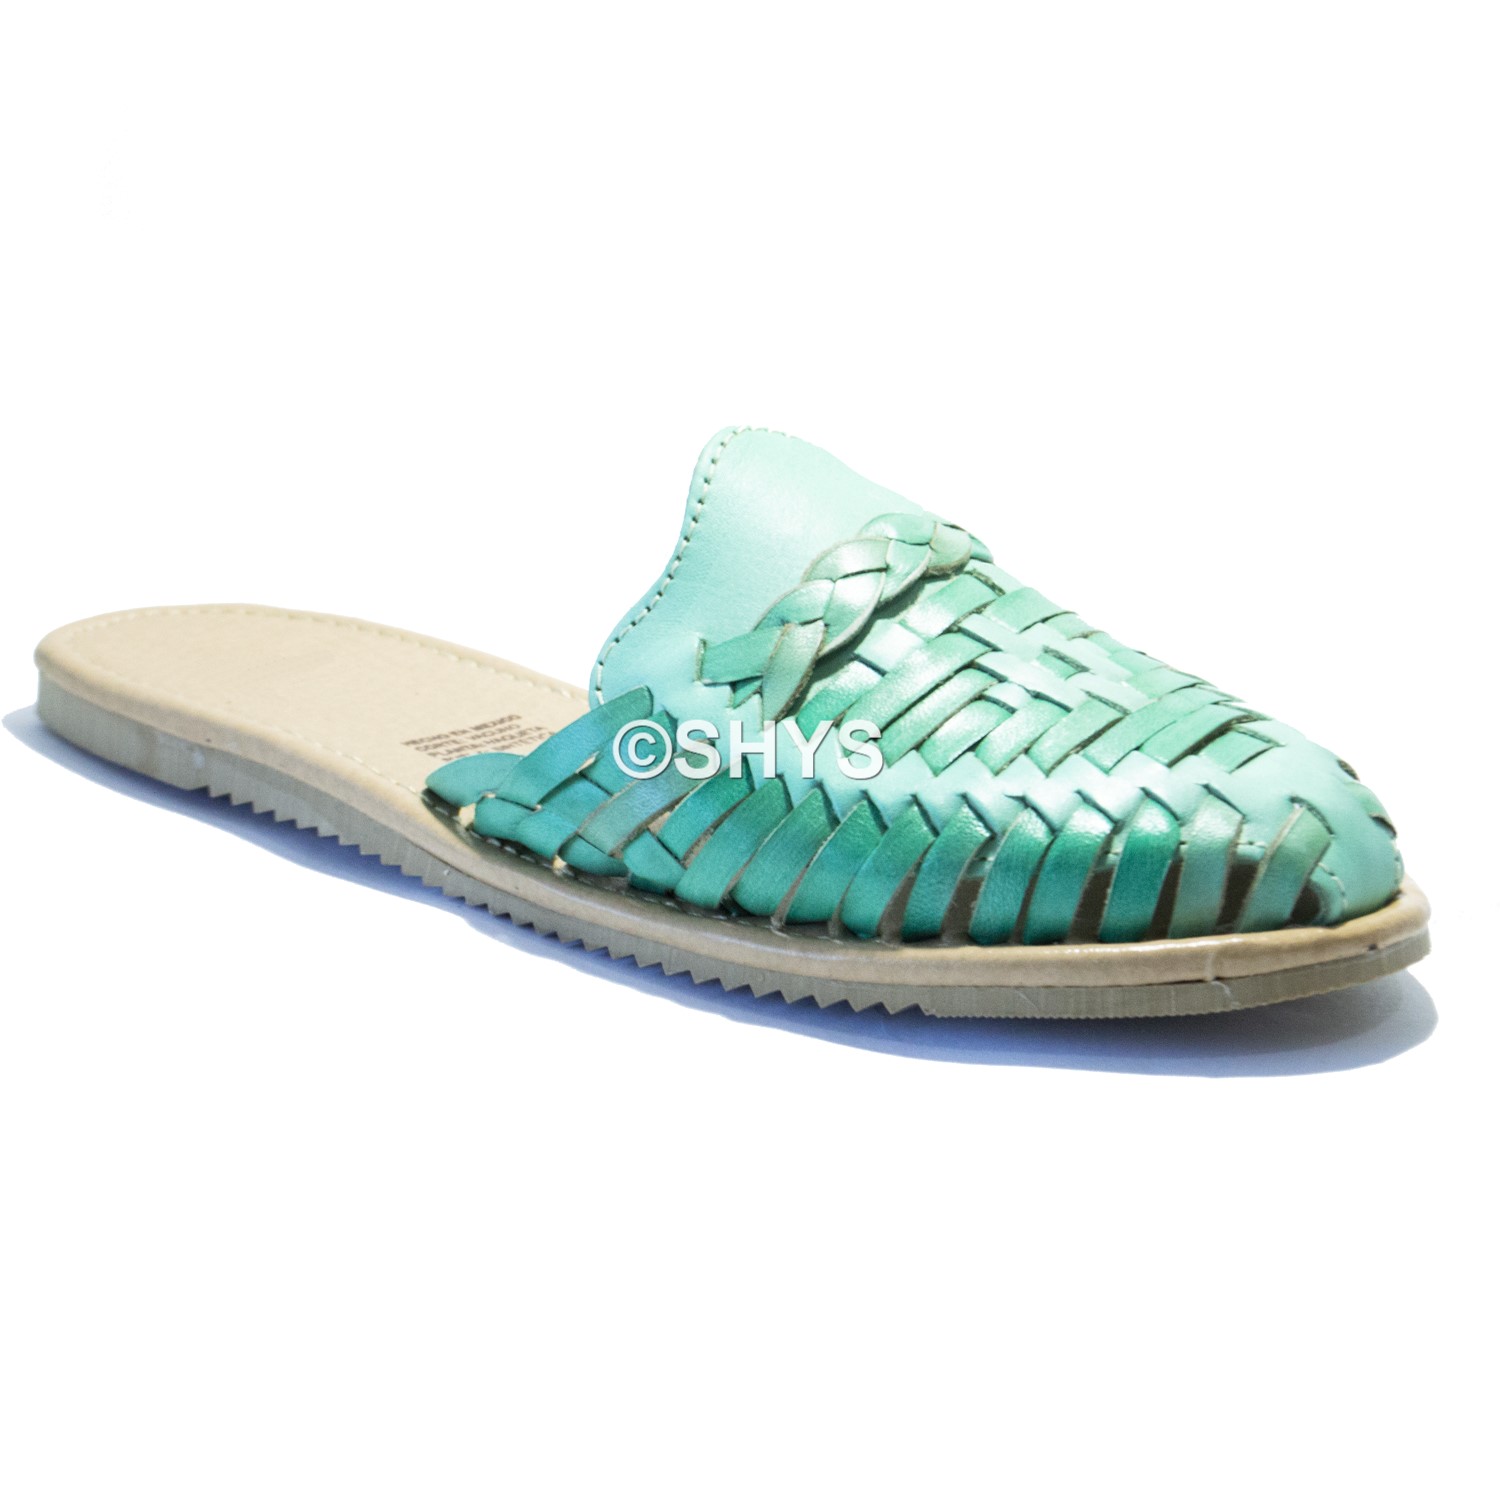 Leather Mexican Sandals For Woman Huaraches Menta Des-036-4